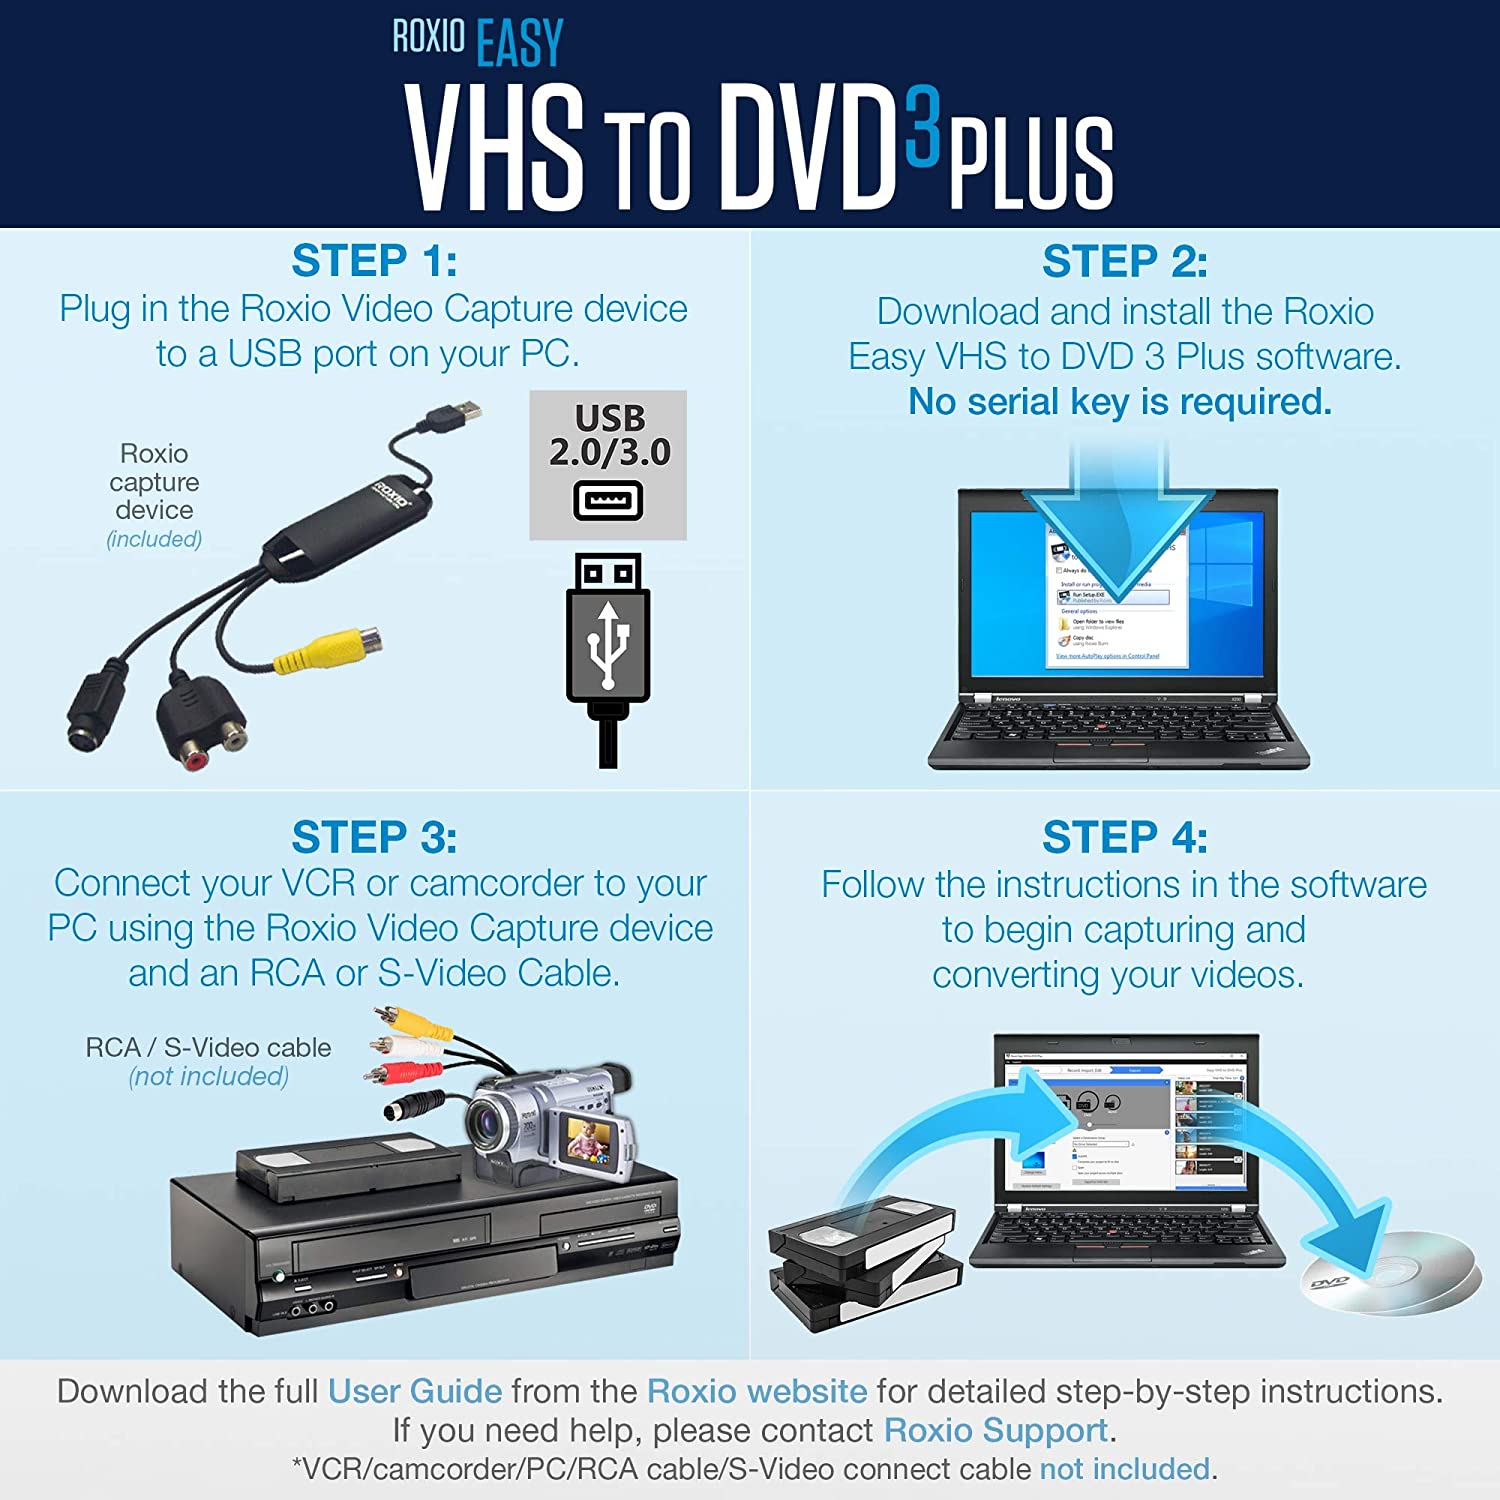 download the last version for windows Roxio Easy VHS to DVD Plus 4.0.4 SP9